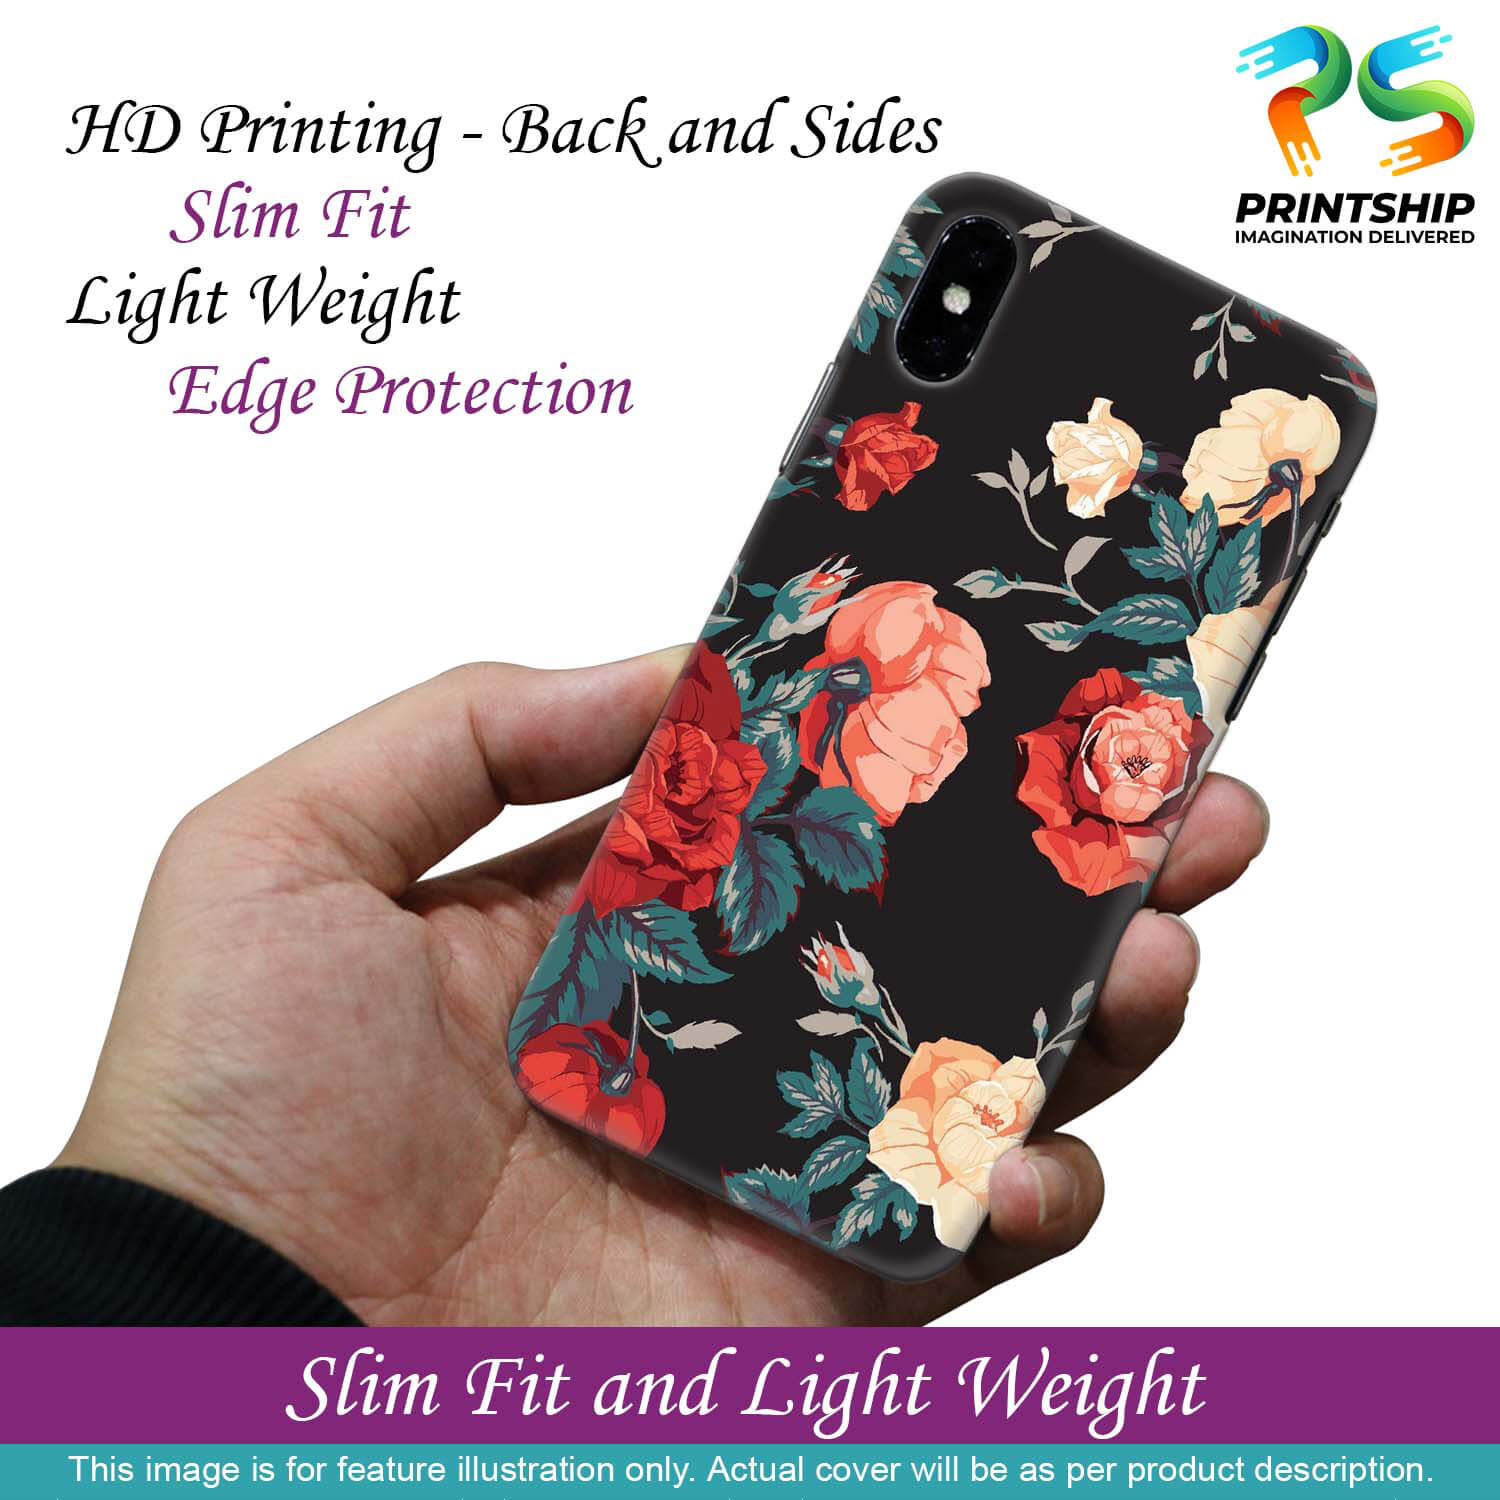 PS1340-Premium Flowers Back Cover for Apple iPhone 13 Pro